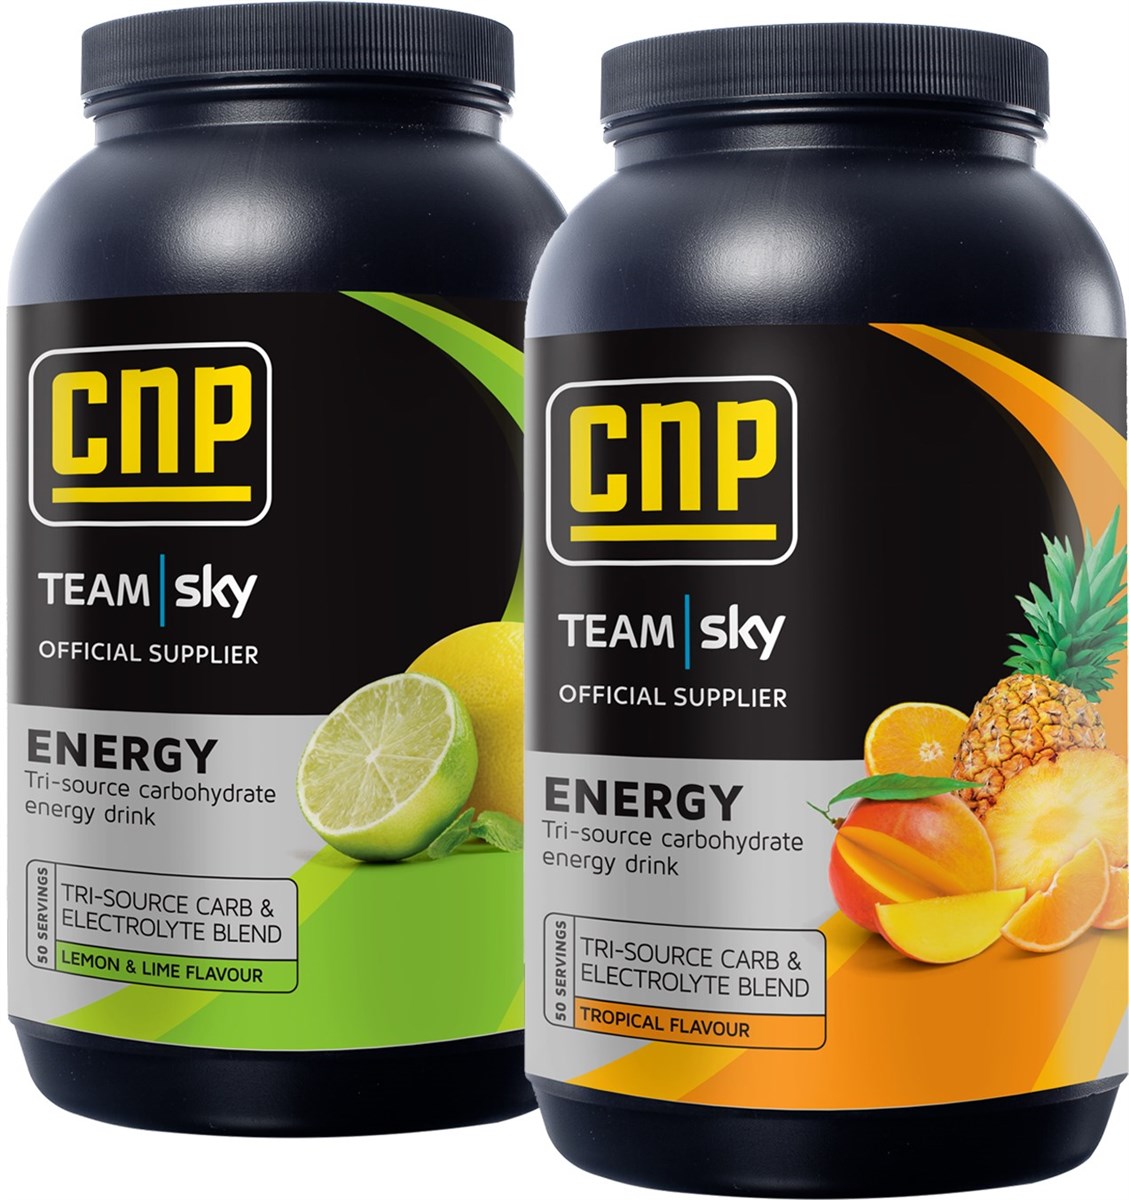 CNP Energy Powder Drink with Tri-Source Carbohydrates - 1 x 1.6kg Tub product image